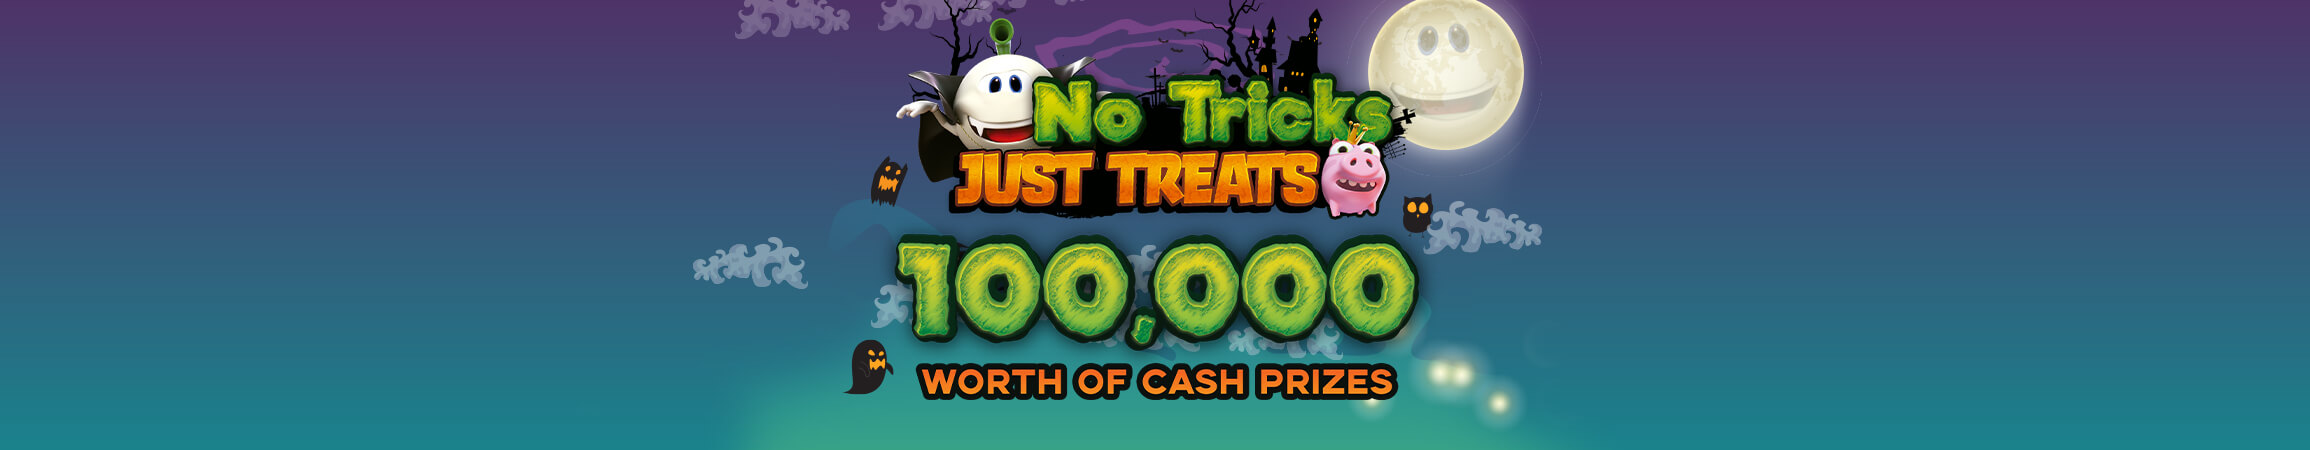 No tricks, just treats in the new FBM bingo campaign for the Philippines